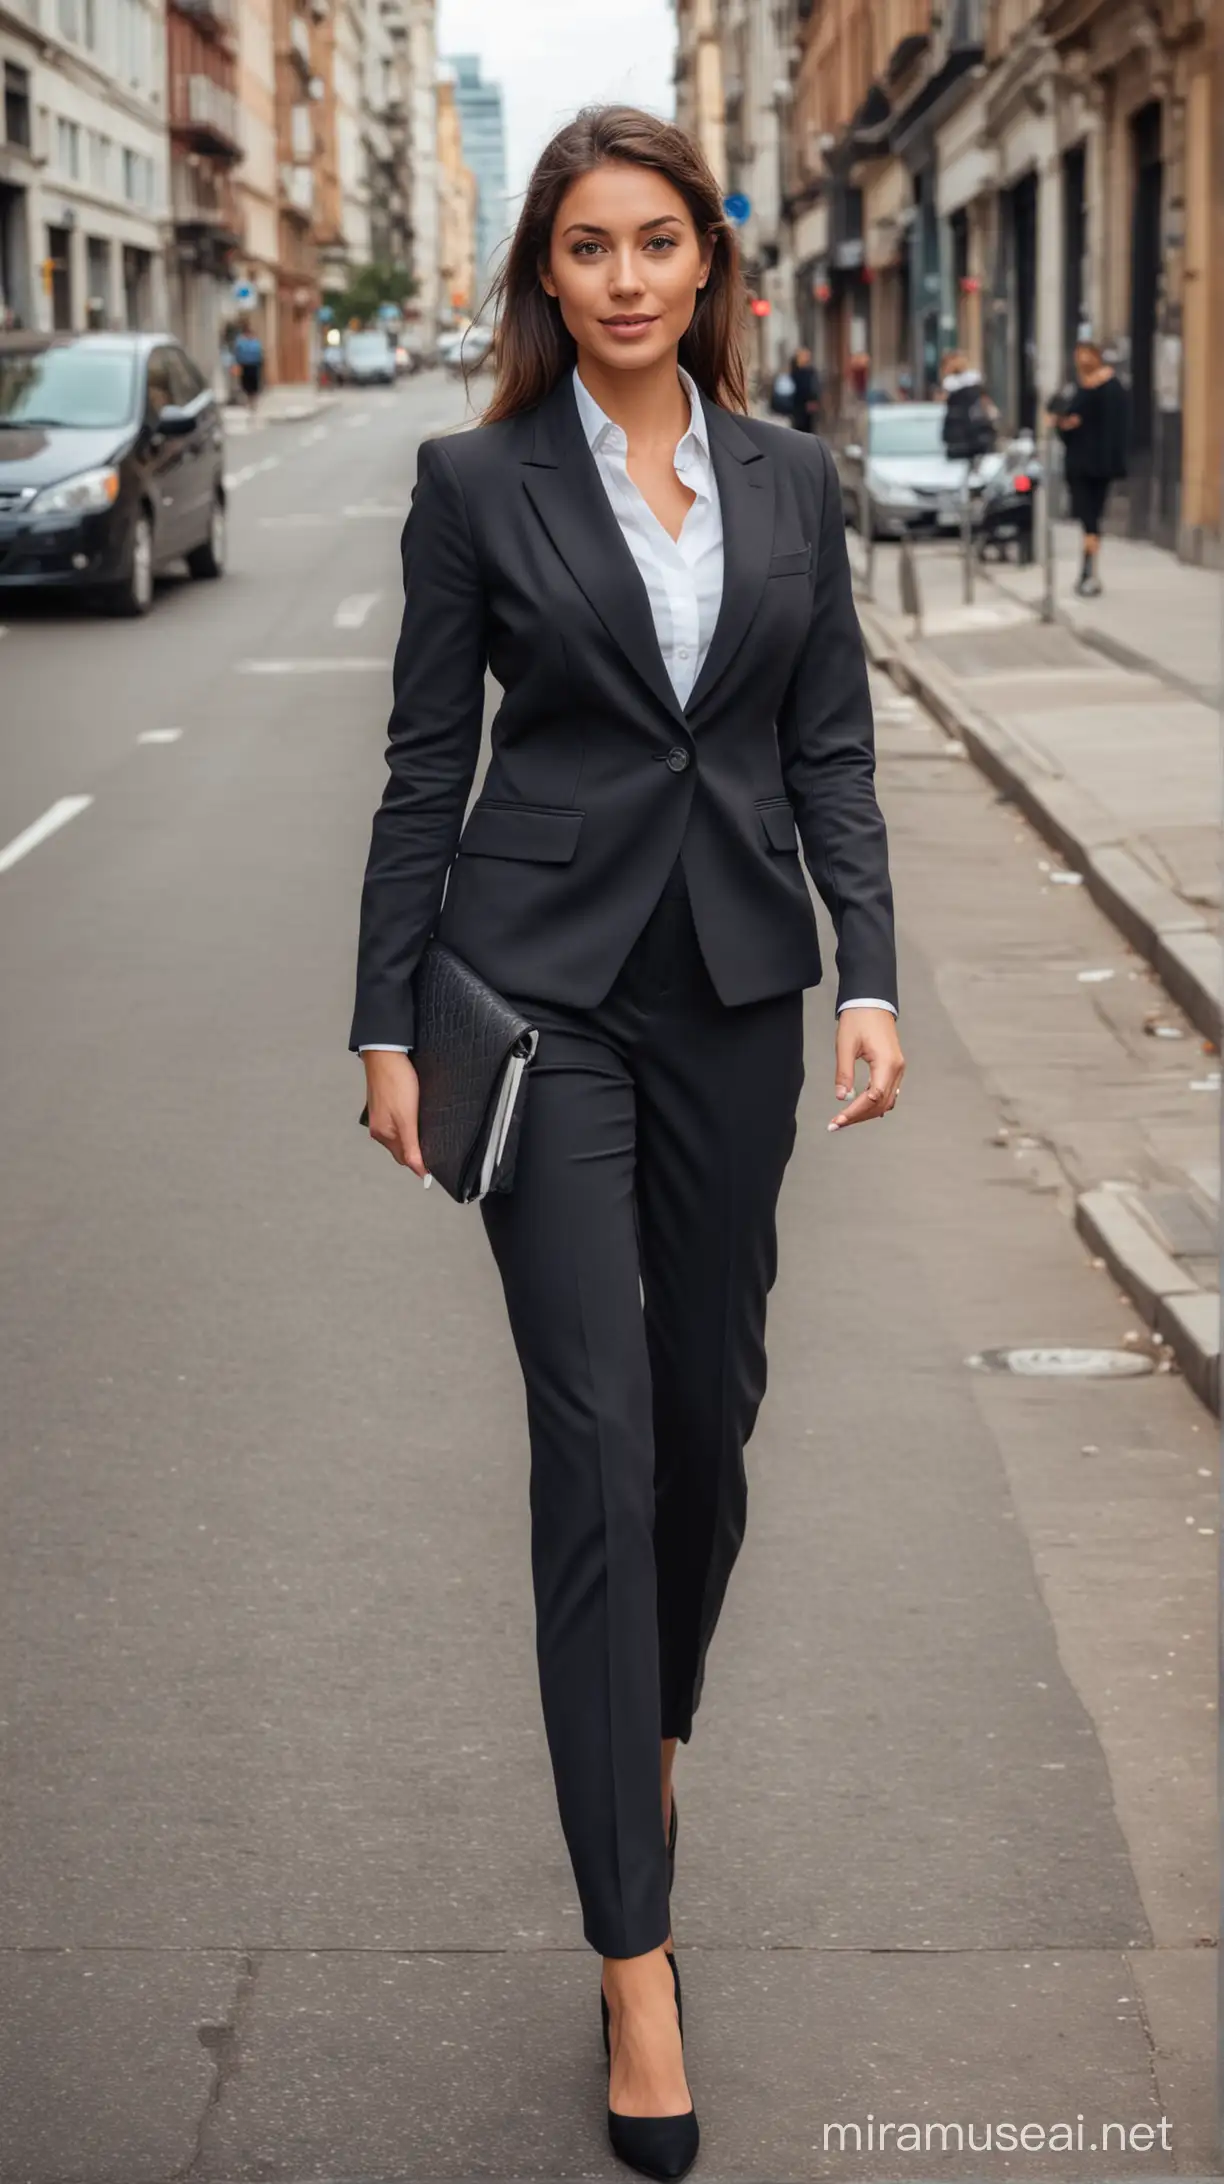 Business woman wearing formal in the street